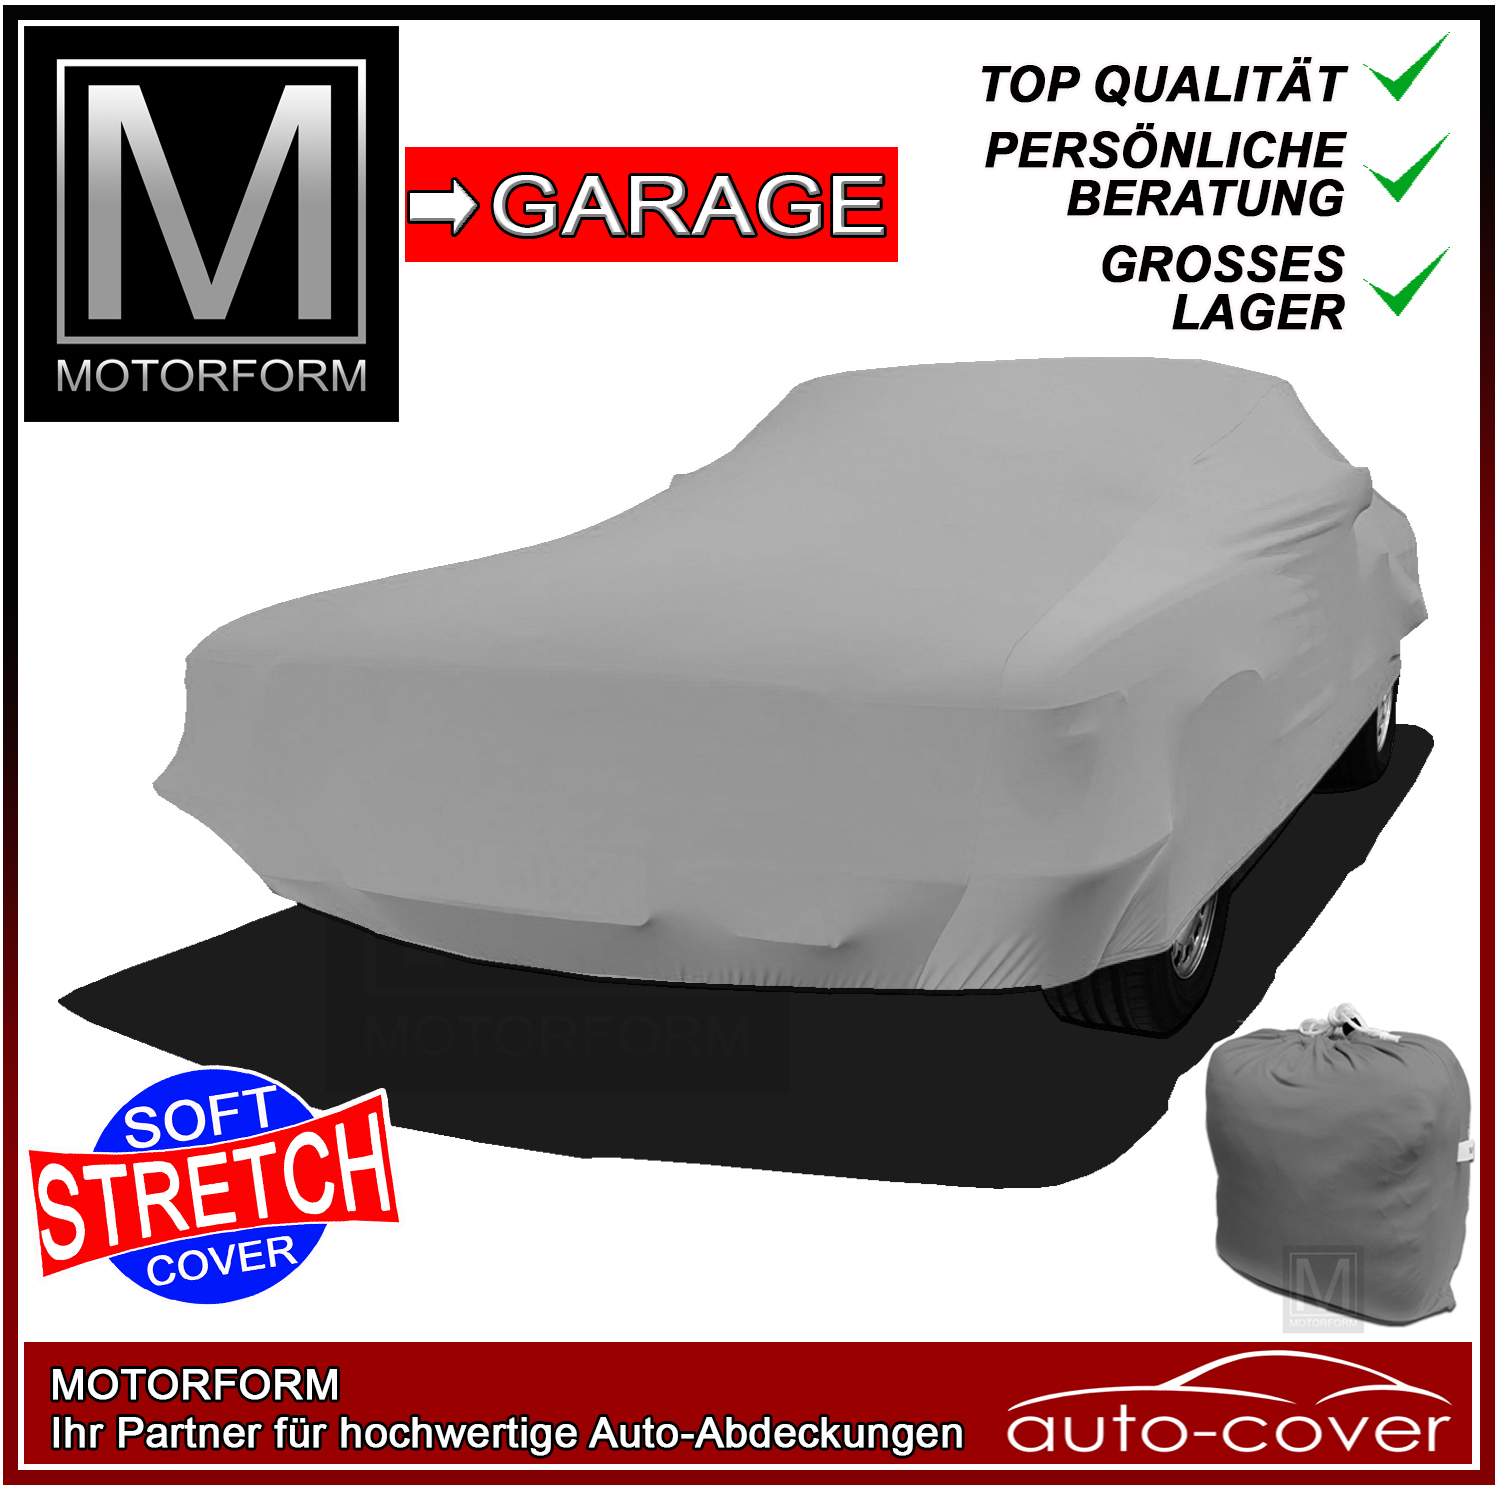 Grey Super Stretchy Cover for Mercedes C-Class C204 Coupe (2011-